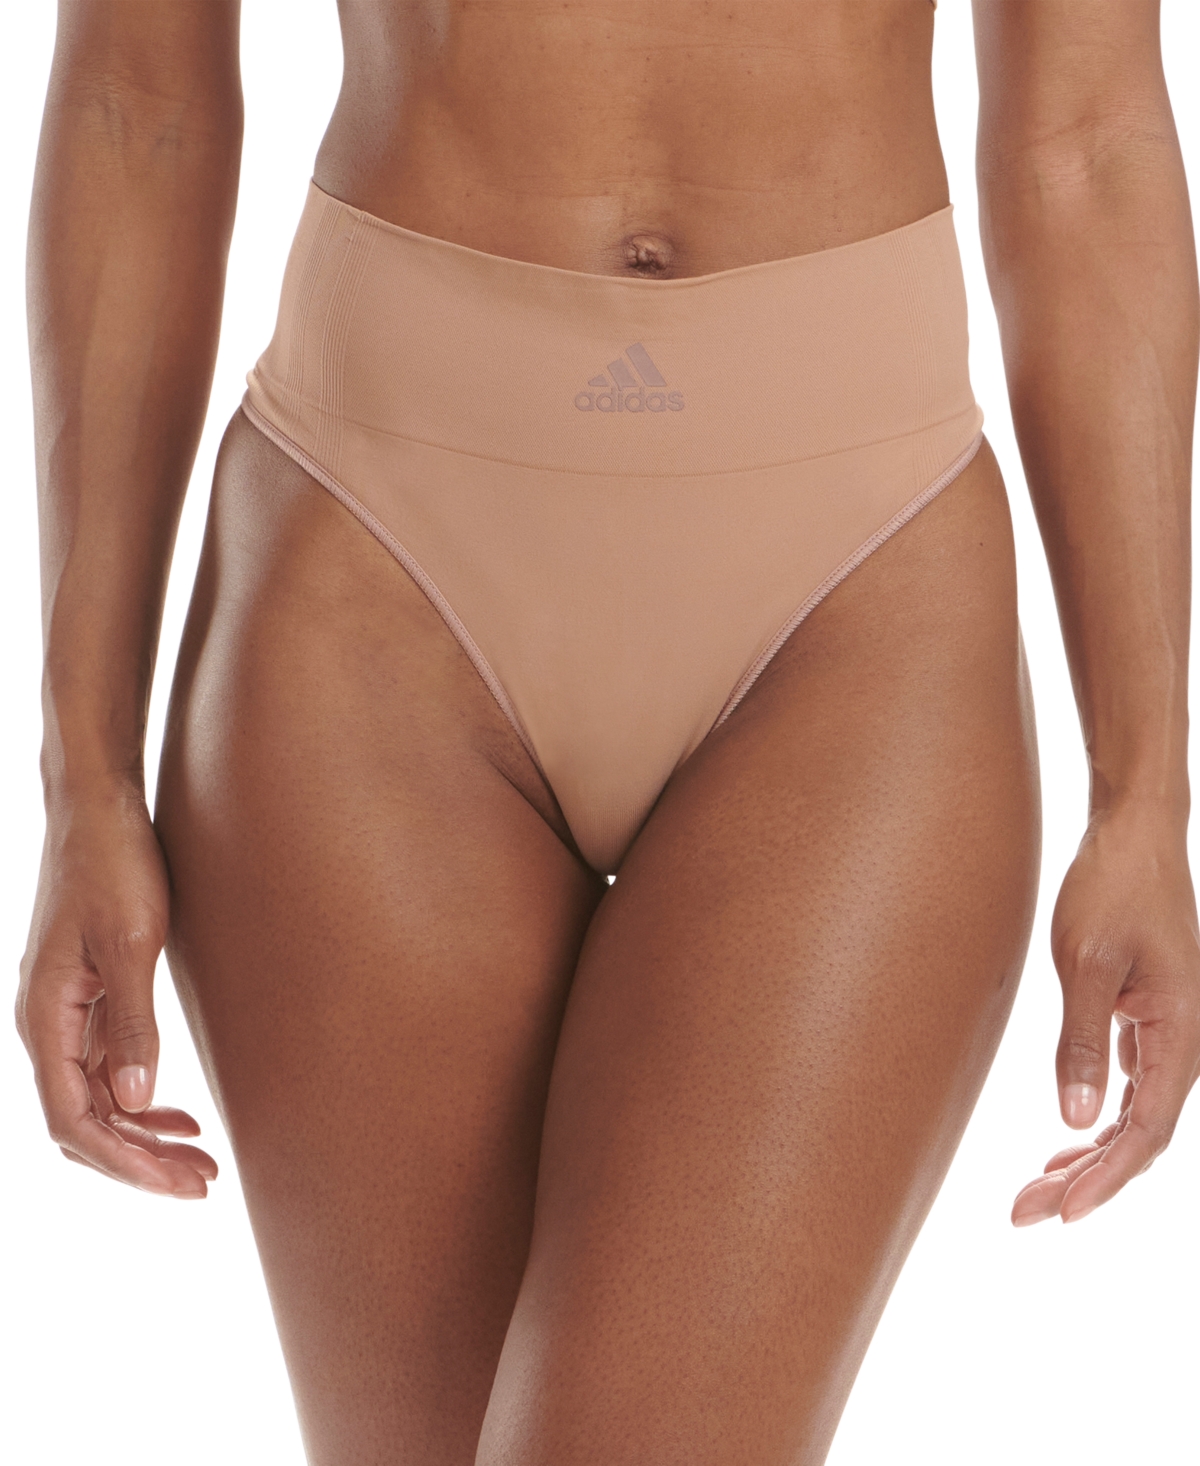 Adidas Originals Intimates Women's 720 Degree Stretch Thong Underwear 4a1h01 In Toasted Almond